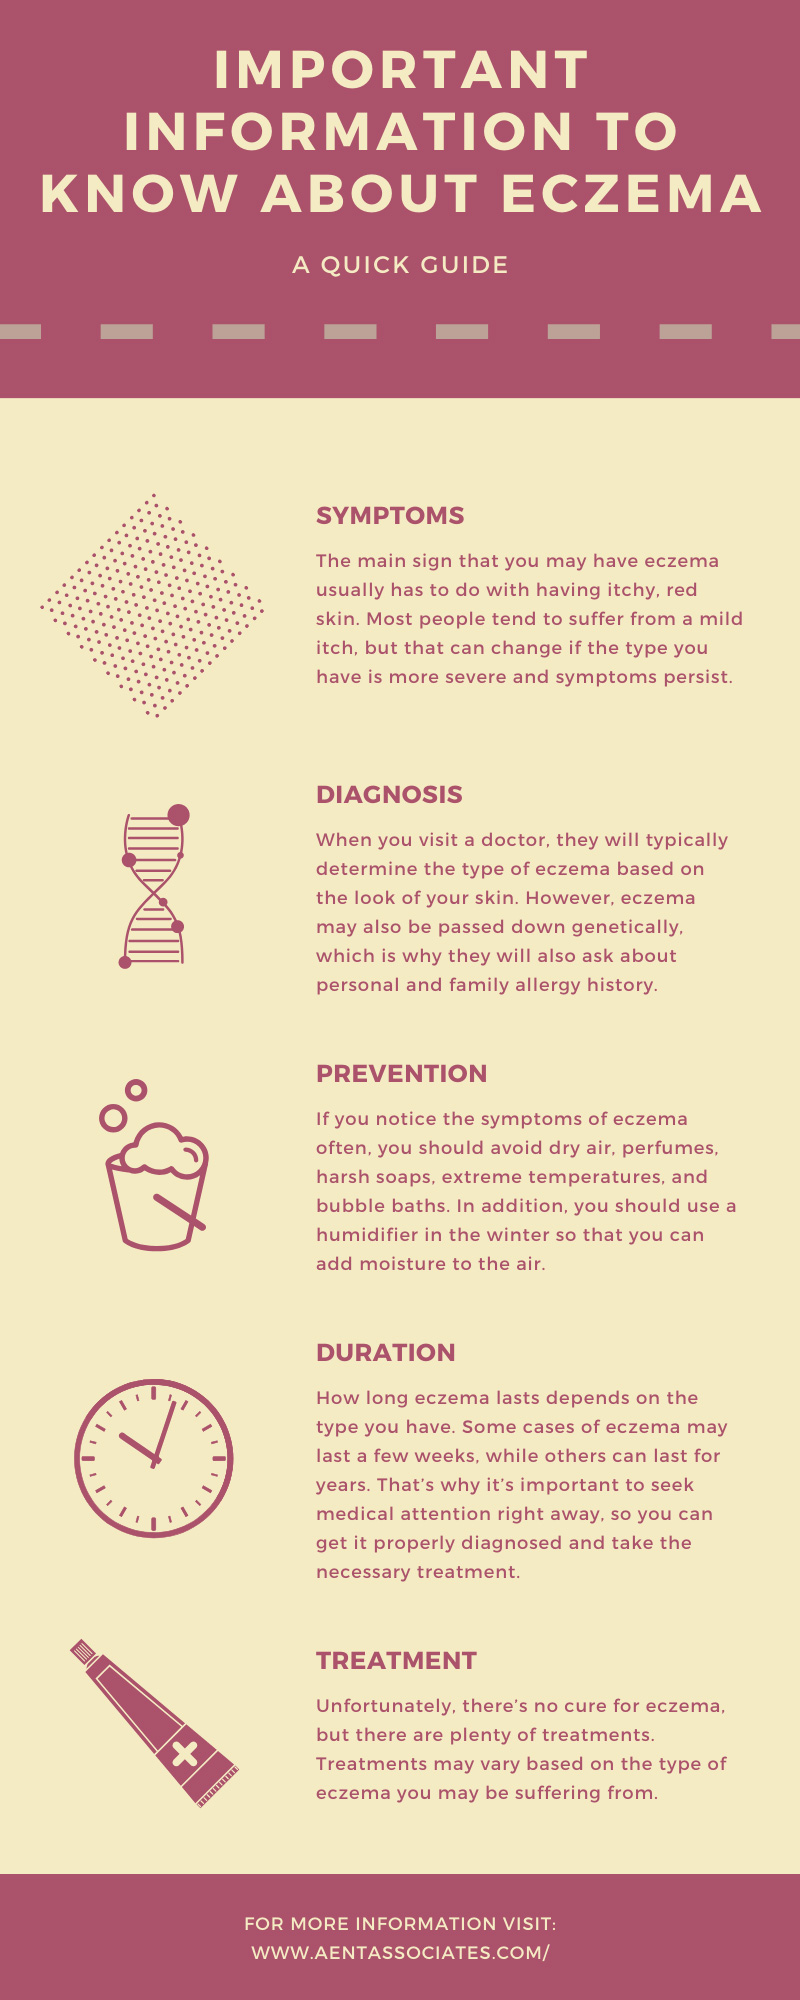 Important Information to Know About Eczema infographic